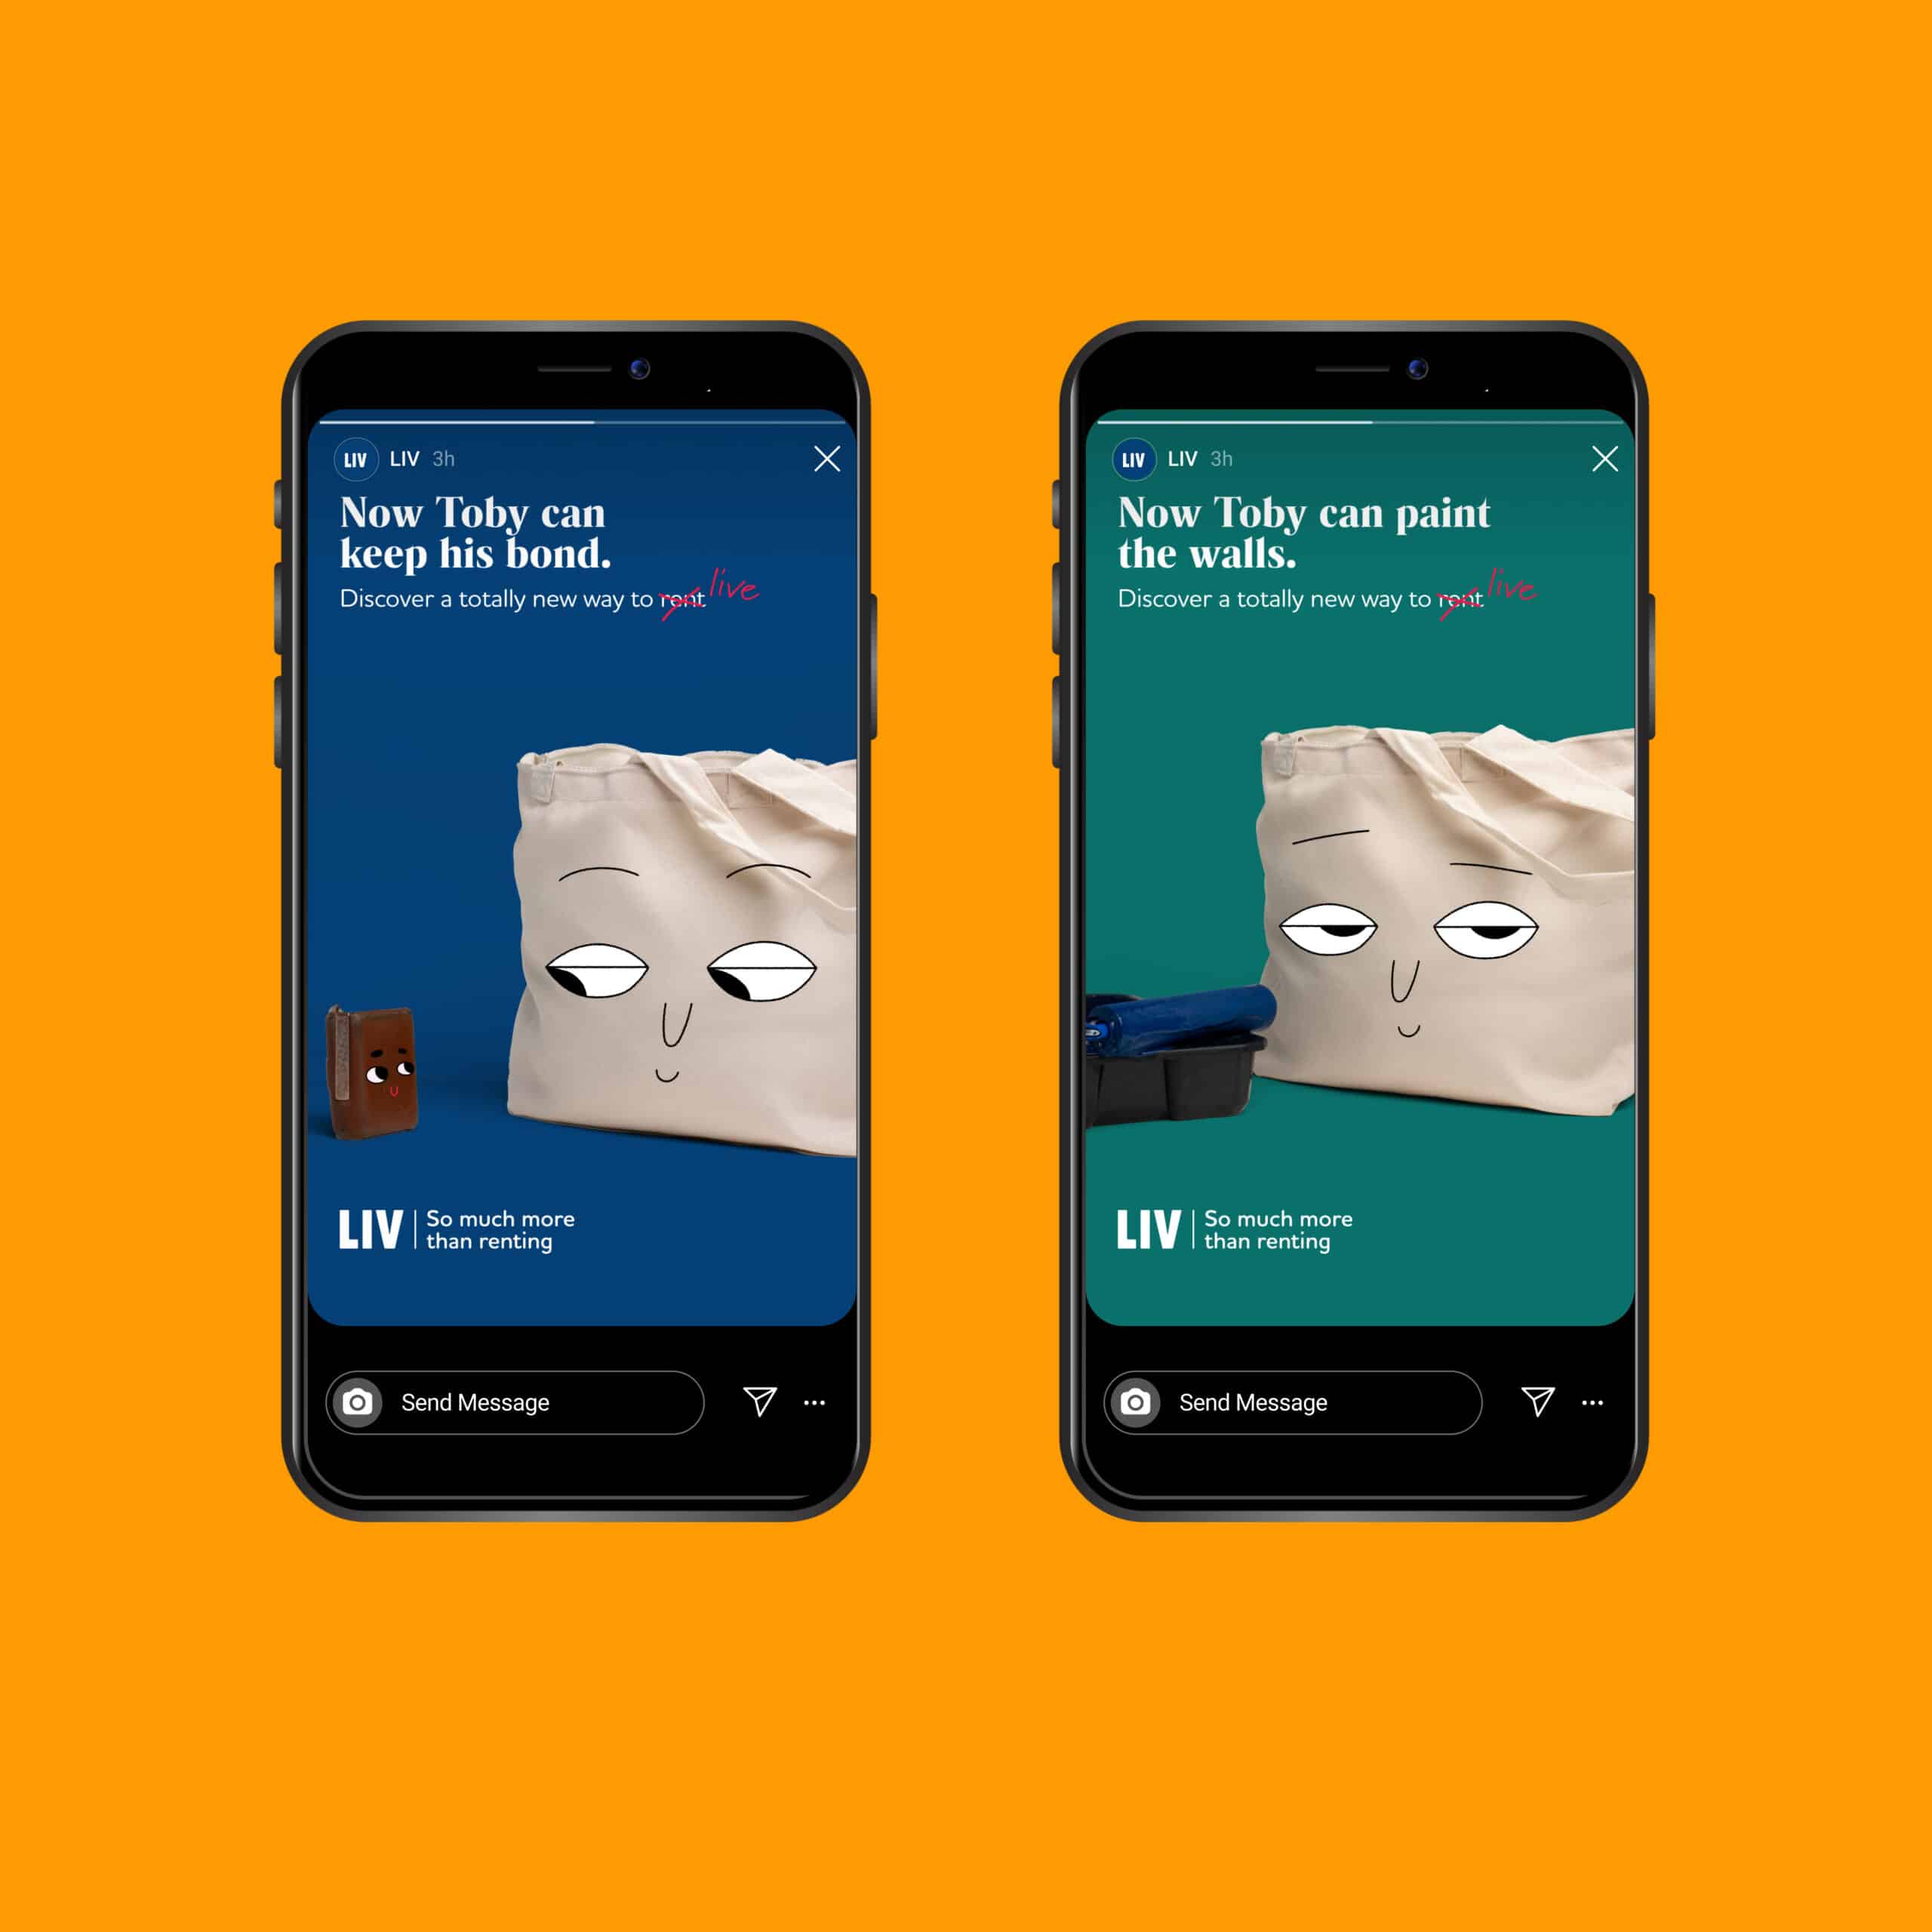 LIV Toby Tote campaign ads mocked up on phones, including grumpy teabag and Toby with a paint roller.